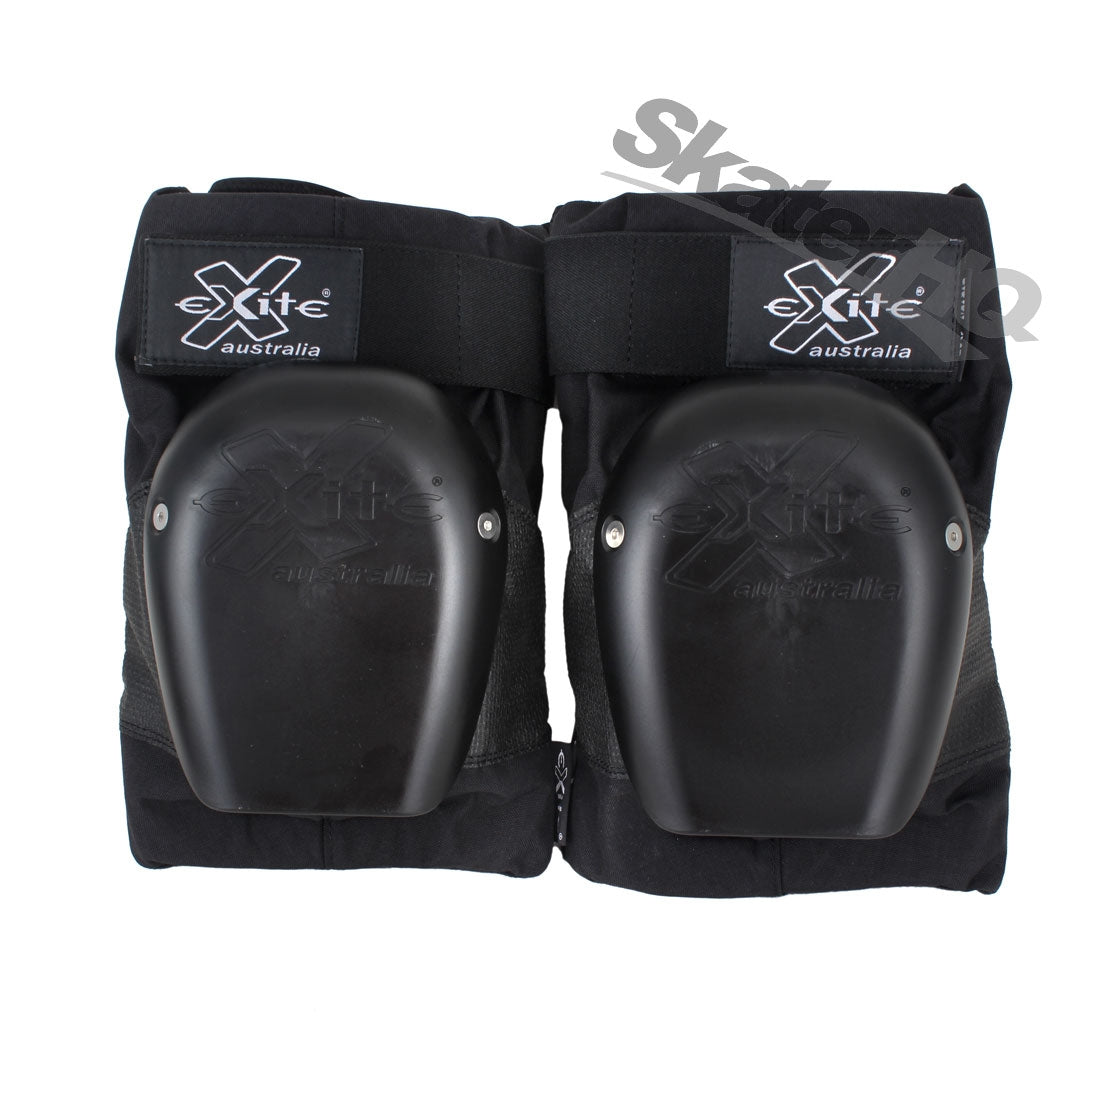 Exite Pro Max Modular Knee Pads - Small Protective Gear